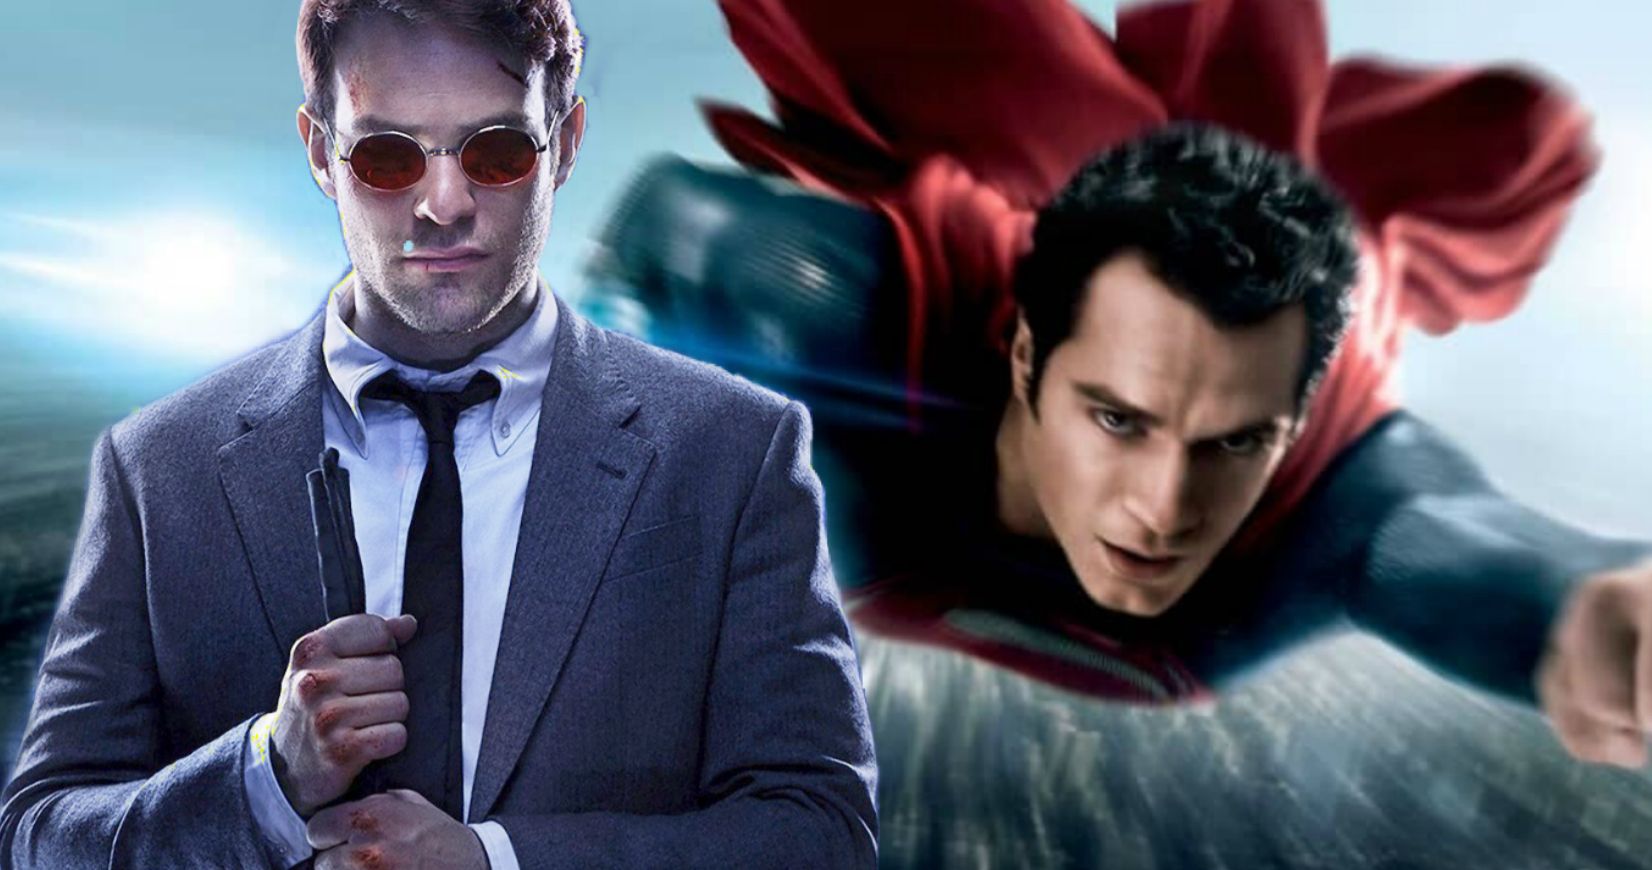 Daredevil Star Charlie Cox as Superman? Kingsman Director Wanted It to Happen